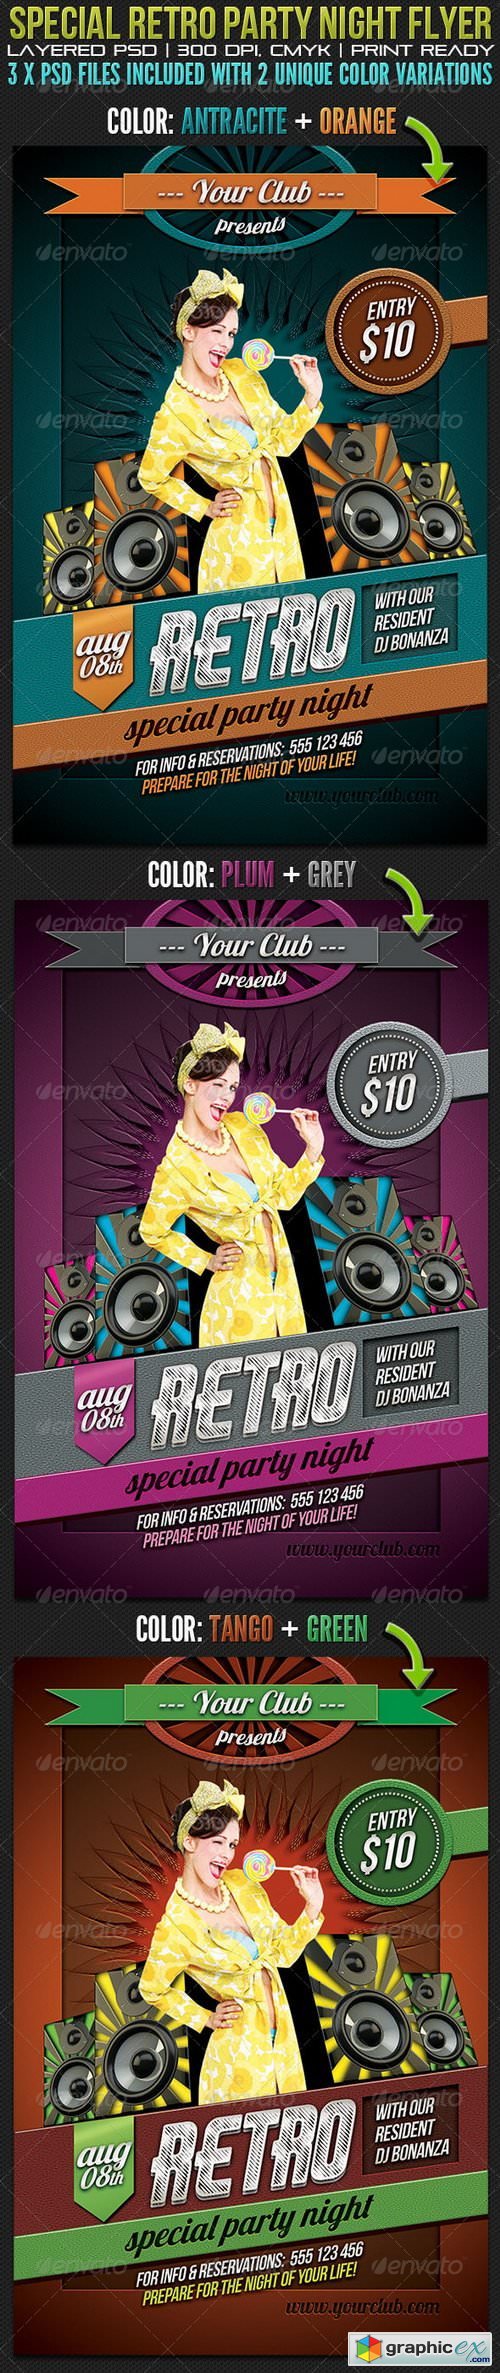 Special Retro Party Night Flyer Template